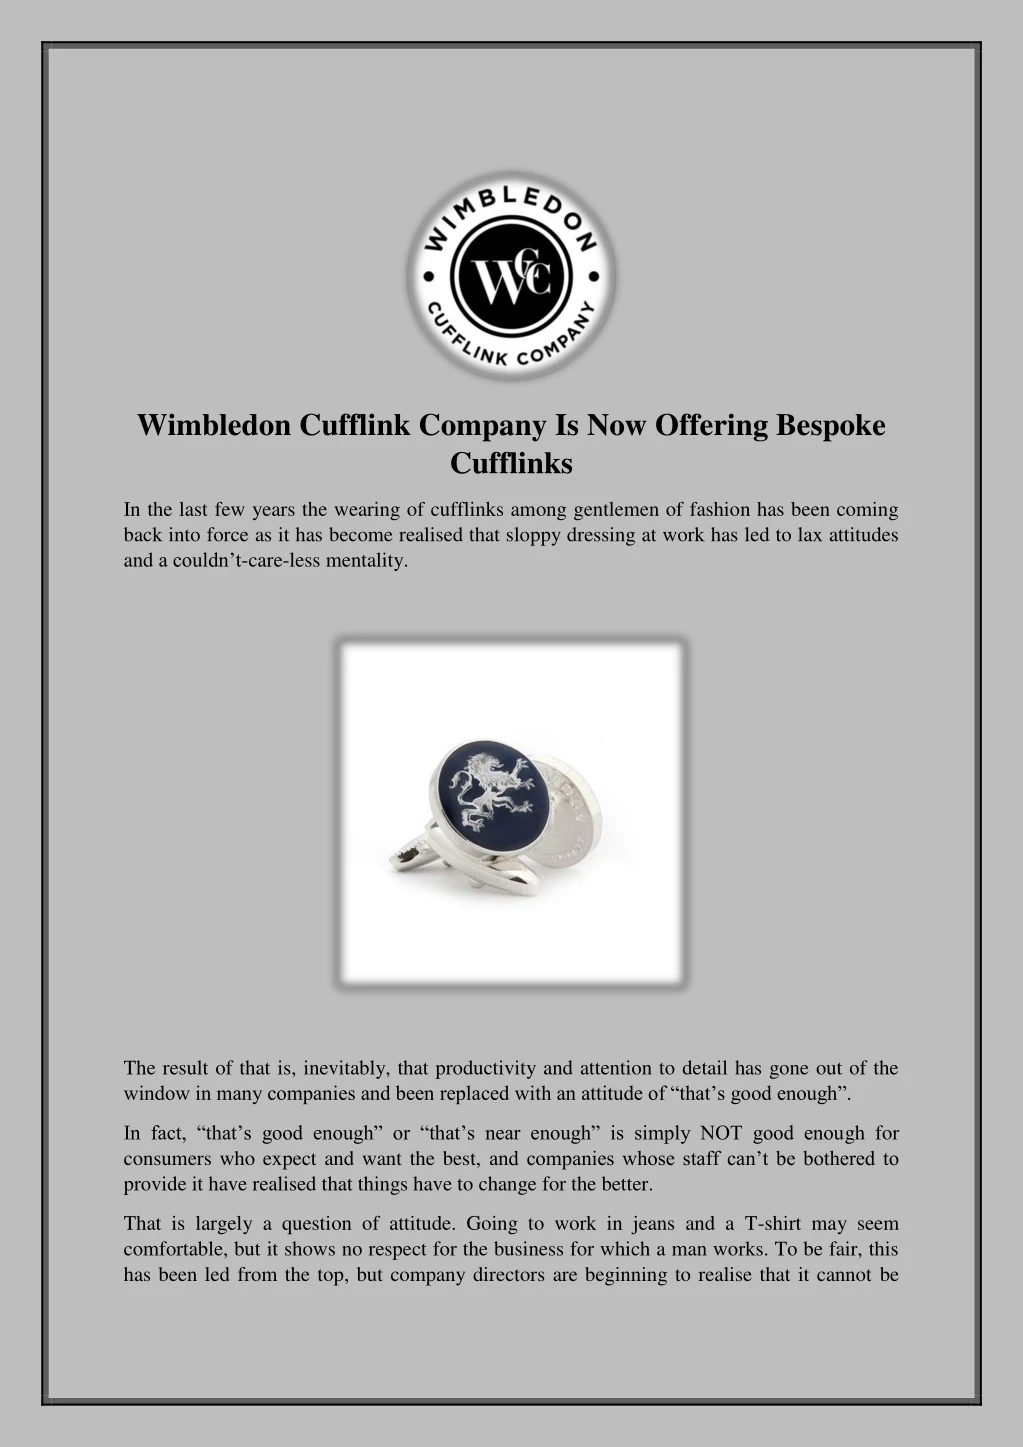 wimbledon cufflink company is now offering